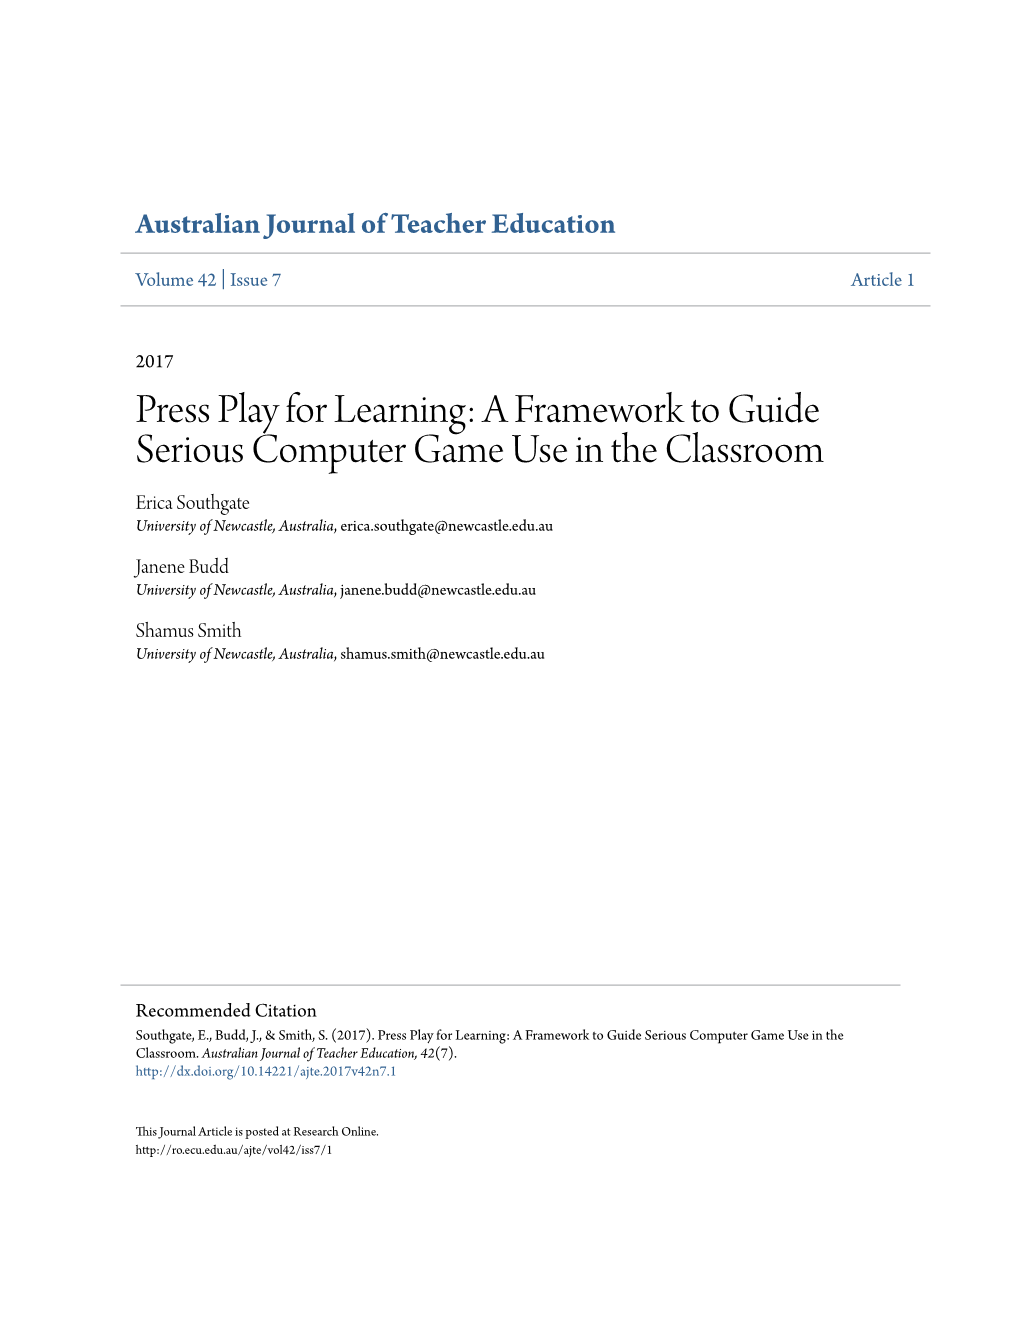 A Framework to Guide Serious Computer Game Use in the Classroom Erica Southgate University of Newcastle, Australia, Erica.Southgate@Newcastle.Edu.Au